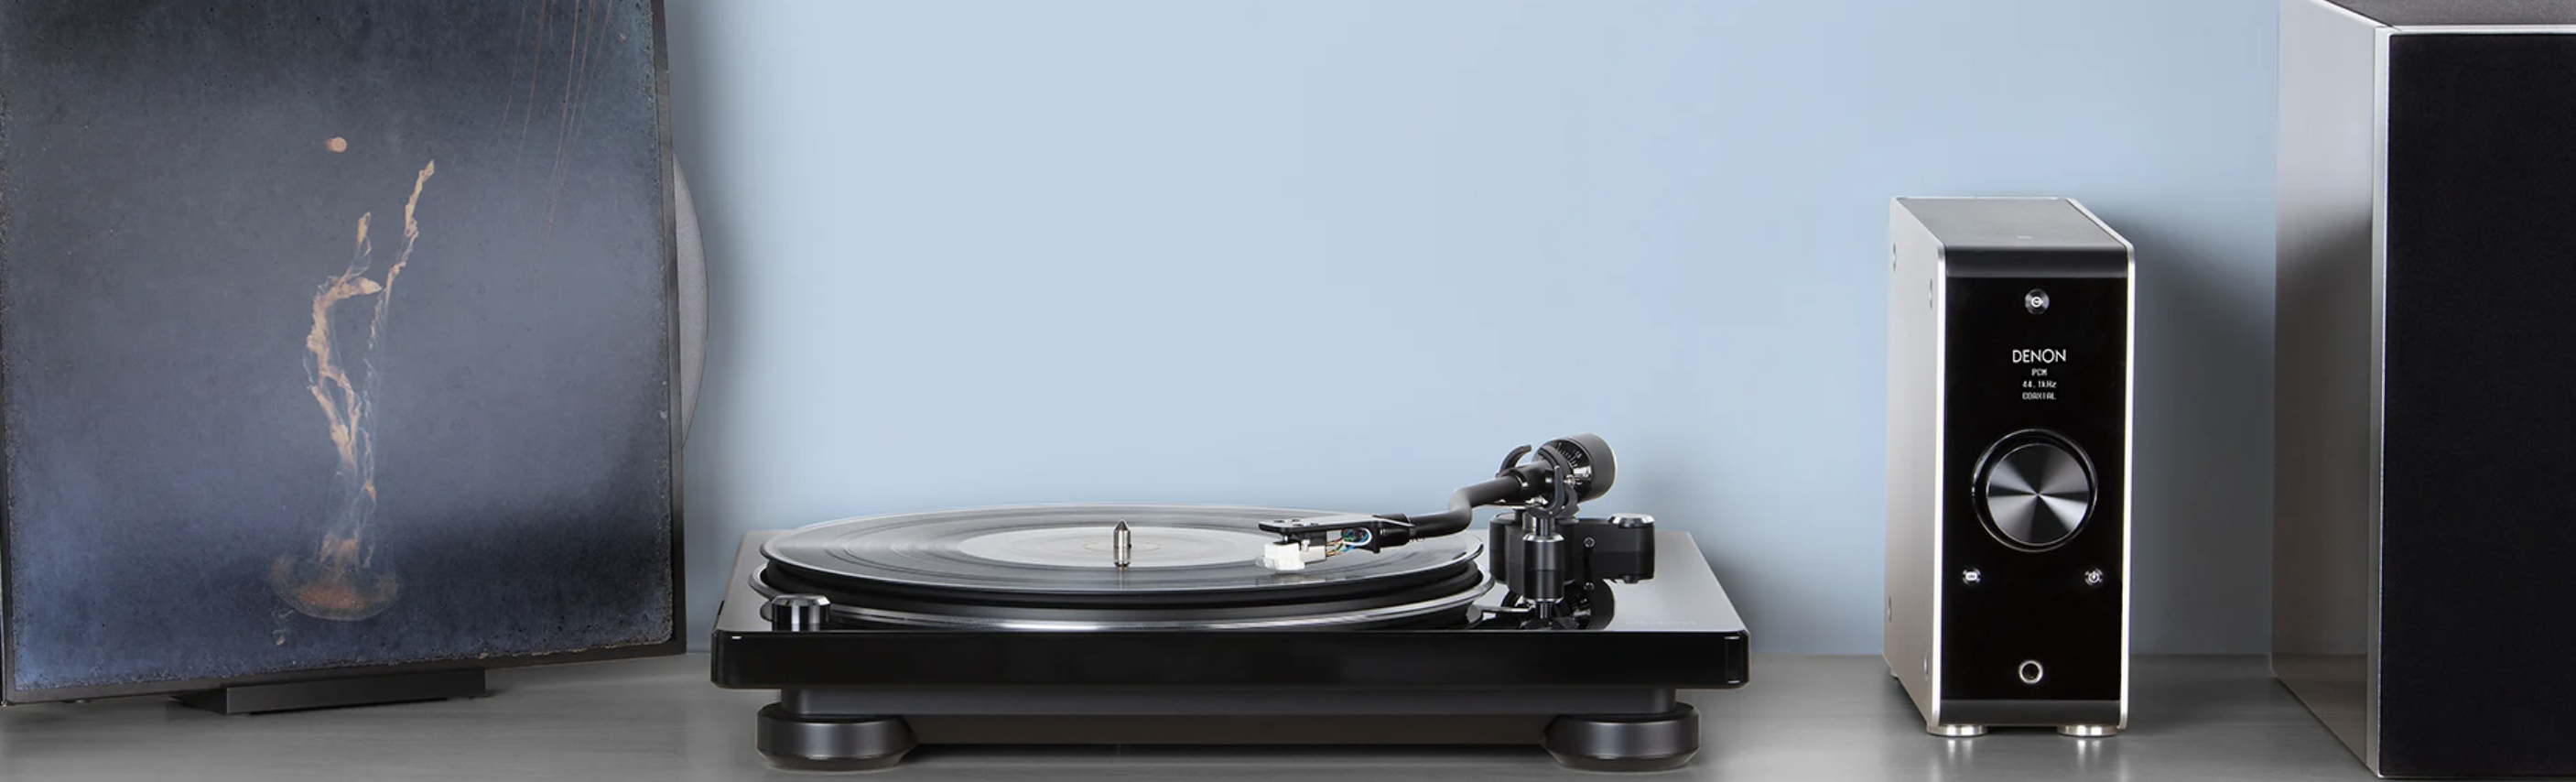 denon-dp-400-turntable-hero-stereophonic.png